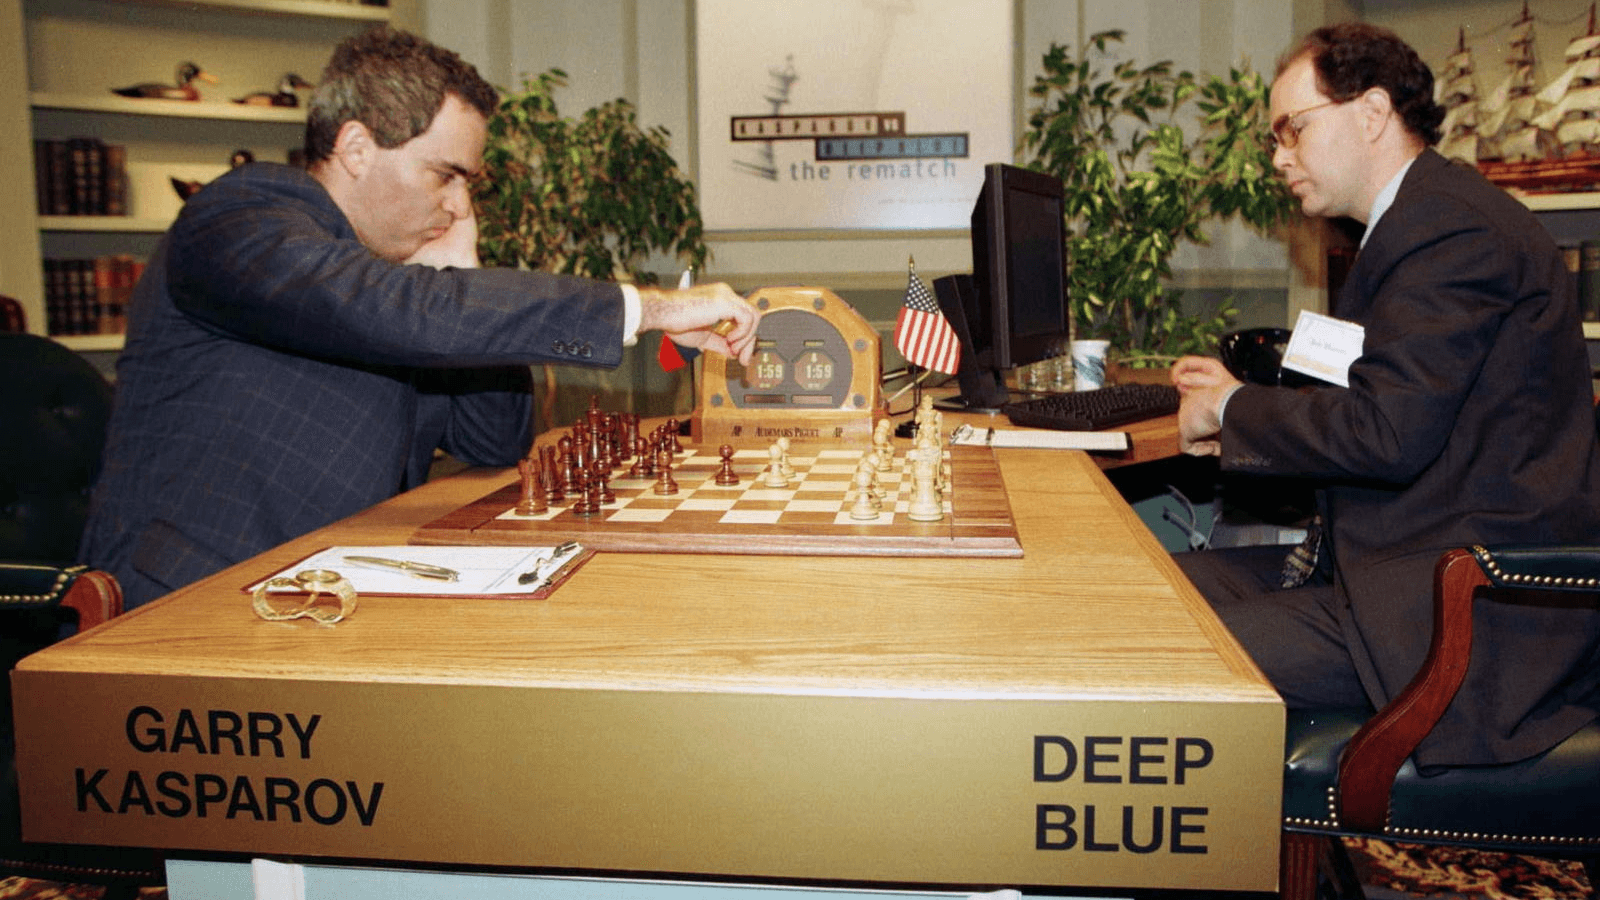 Garry Kasparov faced off against Deep Blue, IBM’s chess-playing computer in 1997. Deep Blue was able to imagine an average of 200,000,000 positions per second. Kasparov ended up losing the match.